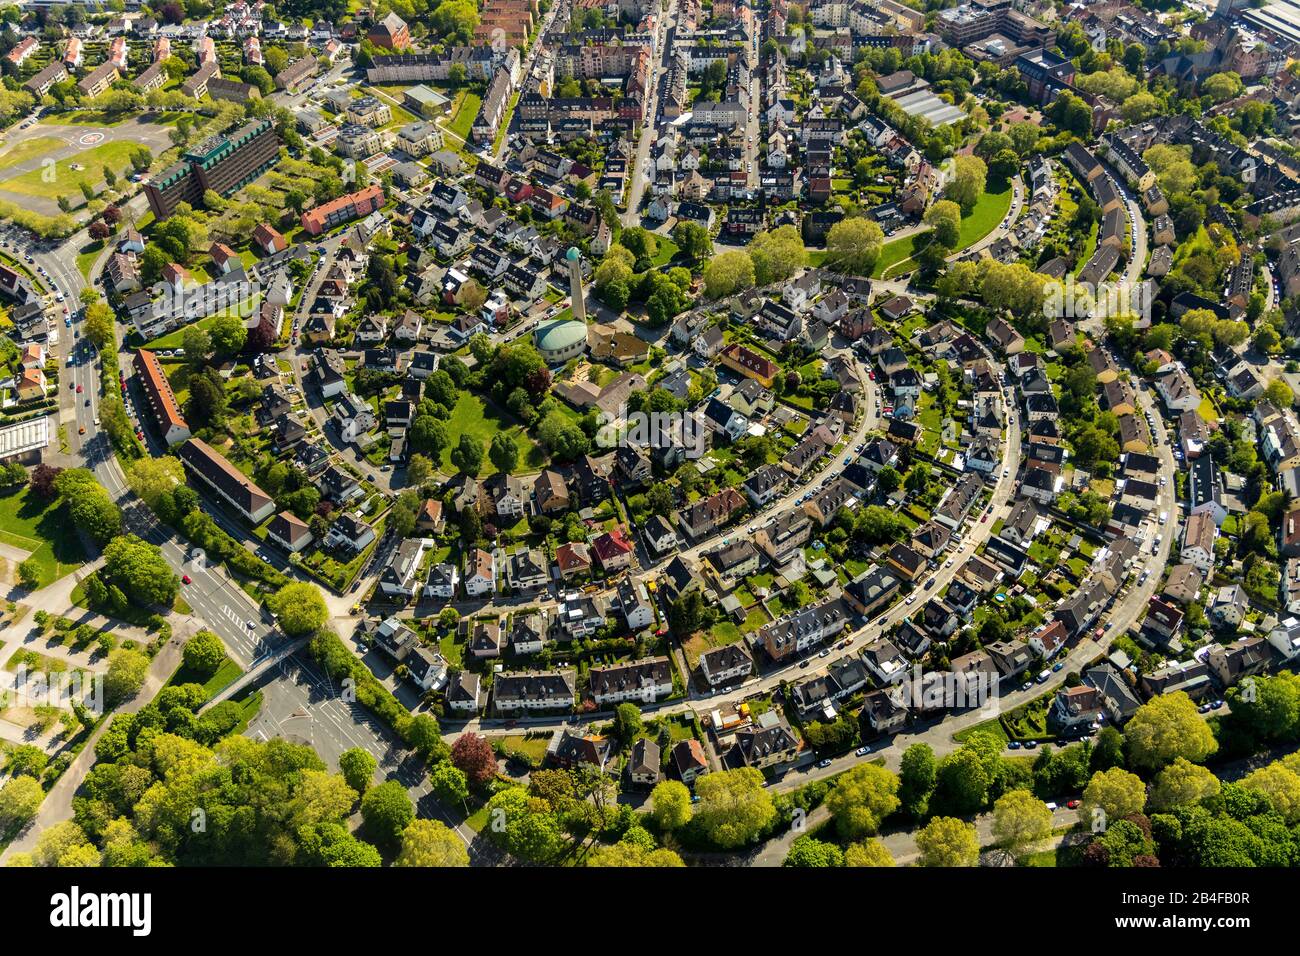 Aerial view of the housing estate Weserstrasse, Am Ischeland, along the contour lines, Isohypsen, in Hagen in the Ruhr area in the state of North Rhine-Westphalia, Germany Stock Photo